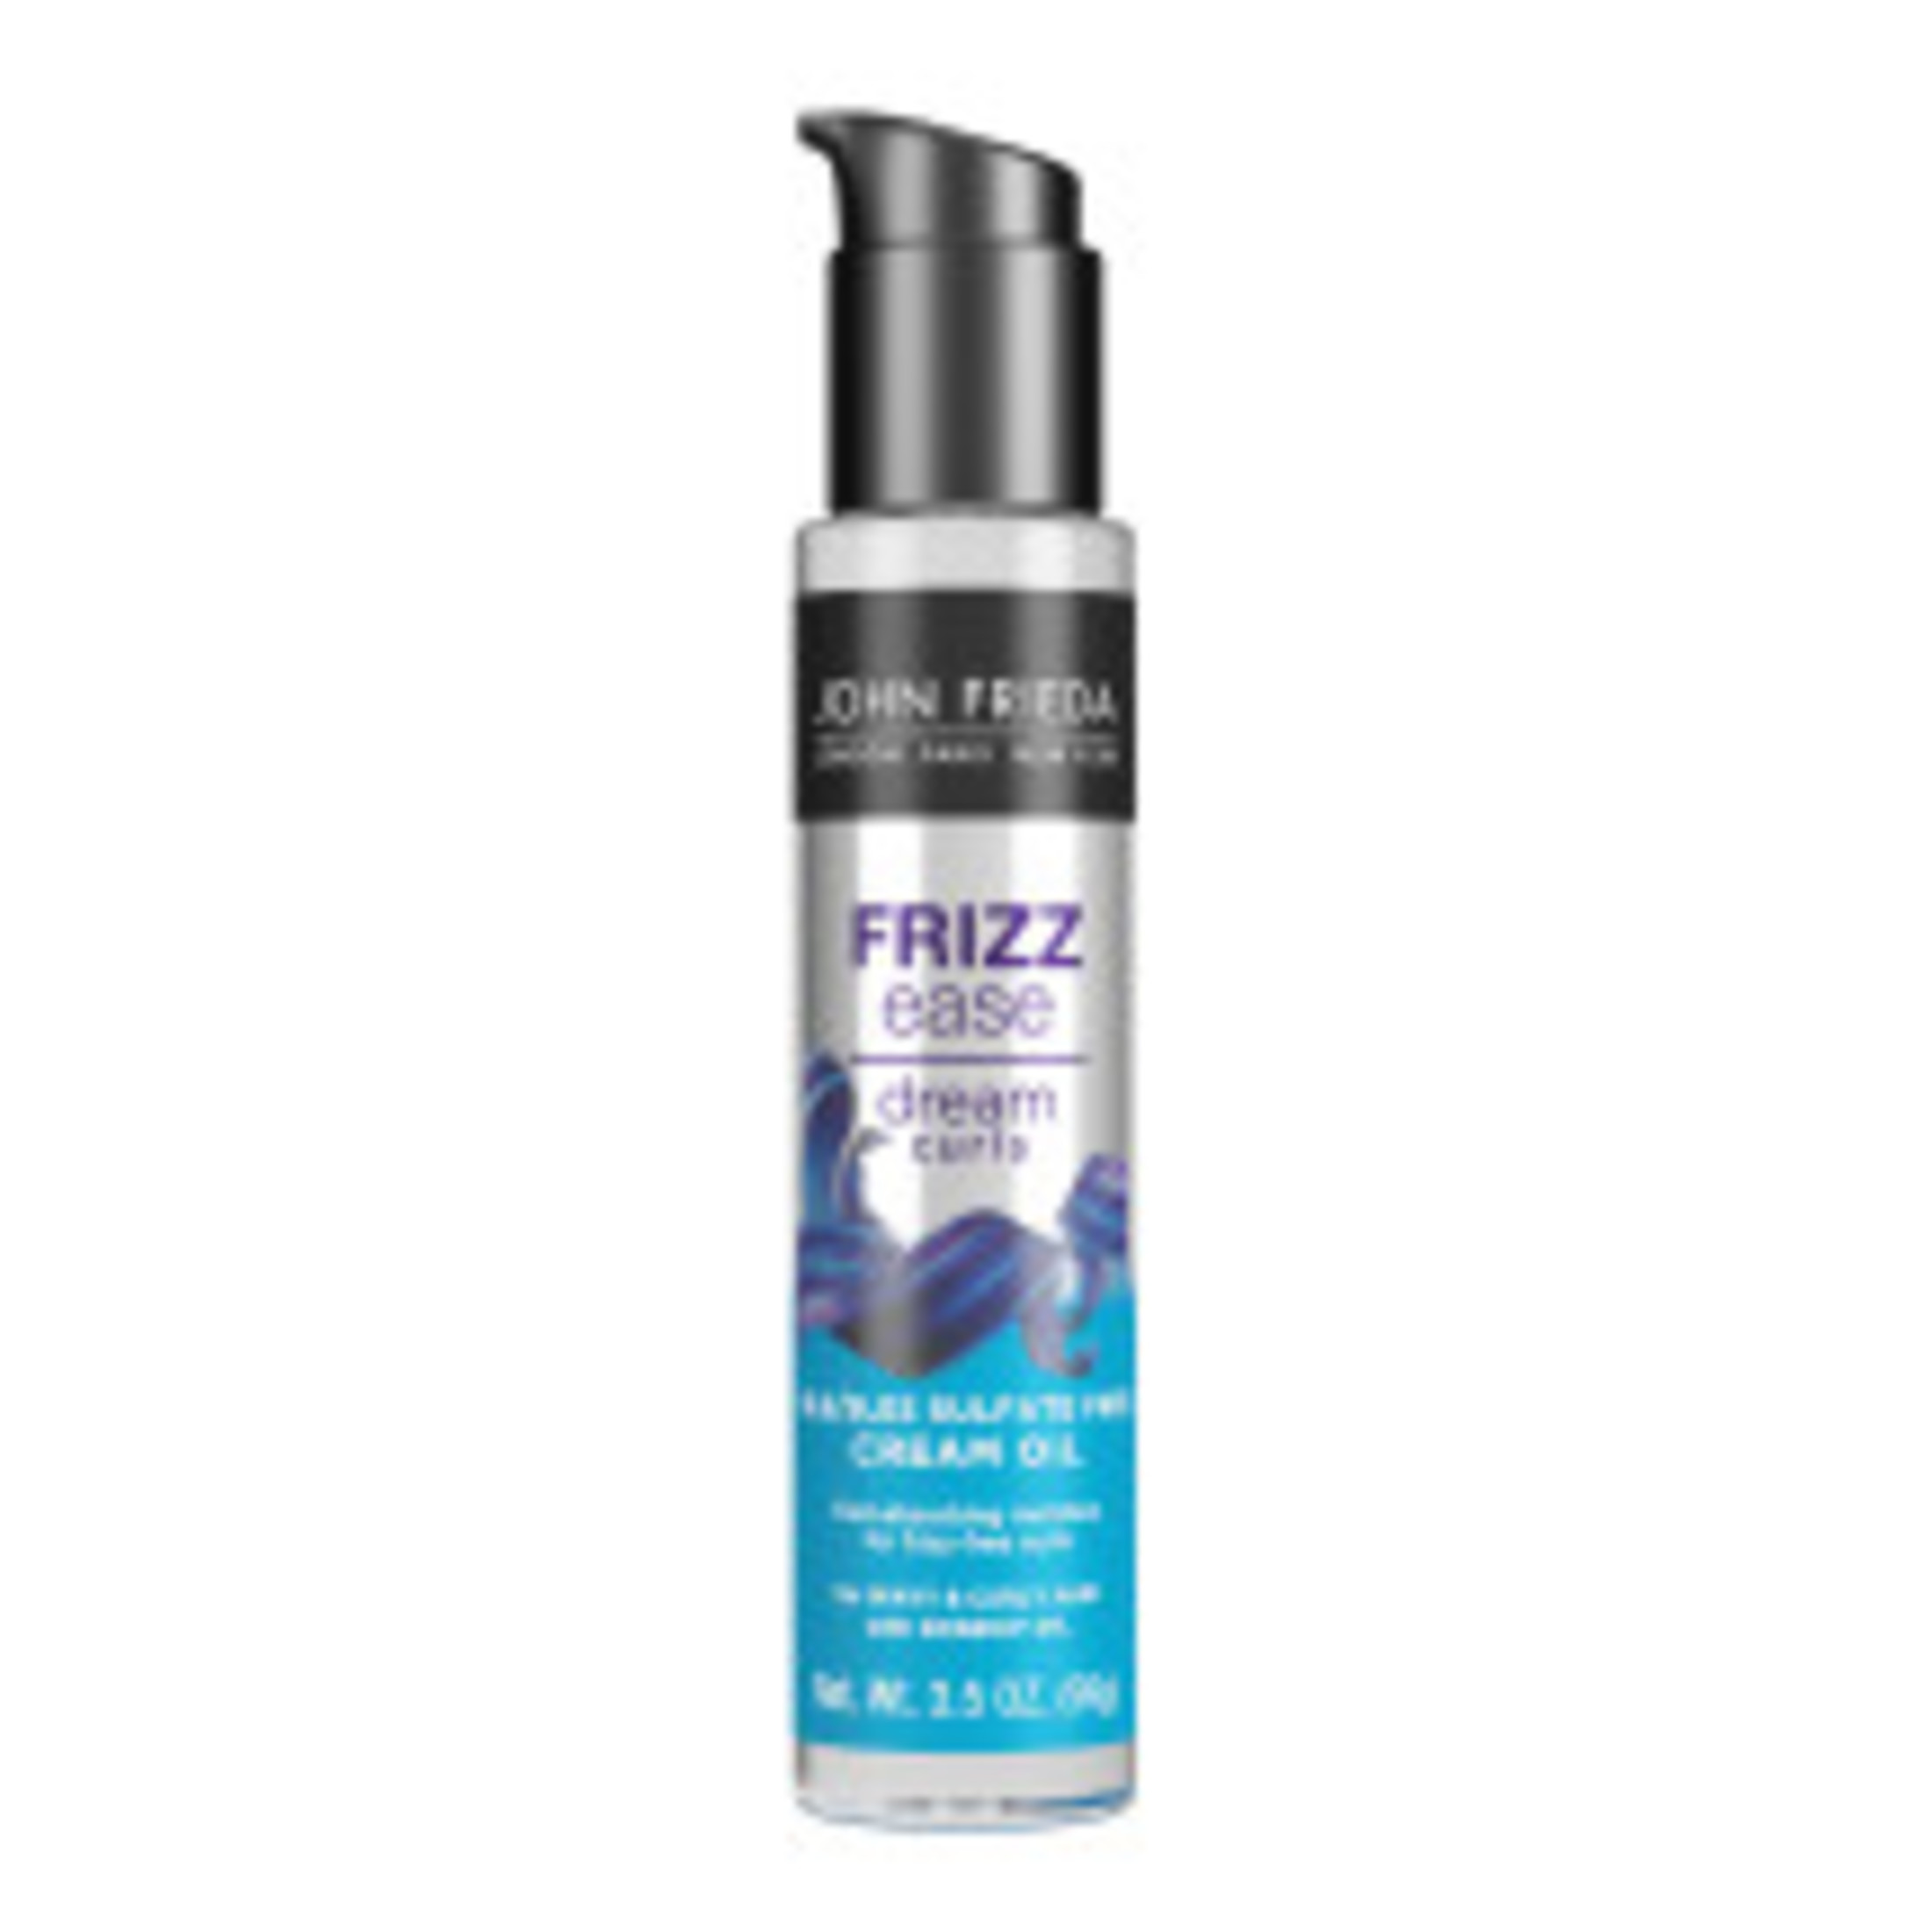 John Frieda Anti Frizz, Frizz Ease Dream Curls with Rosehip Oil, SLS/SLES Sulfate Free Cremé Oil, 3.5 fl oz - image 1 of 7